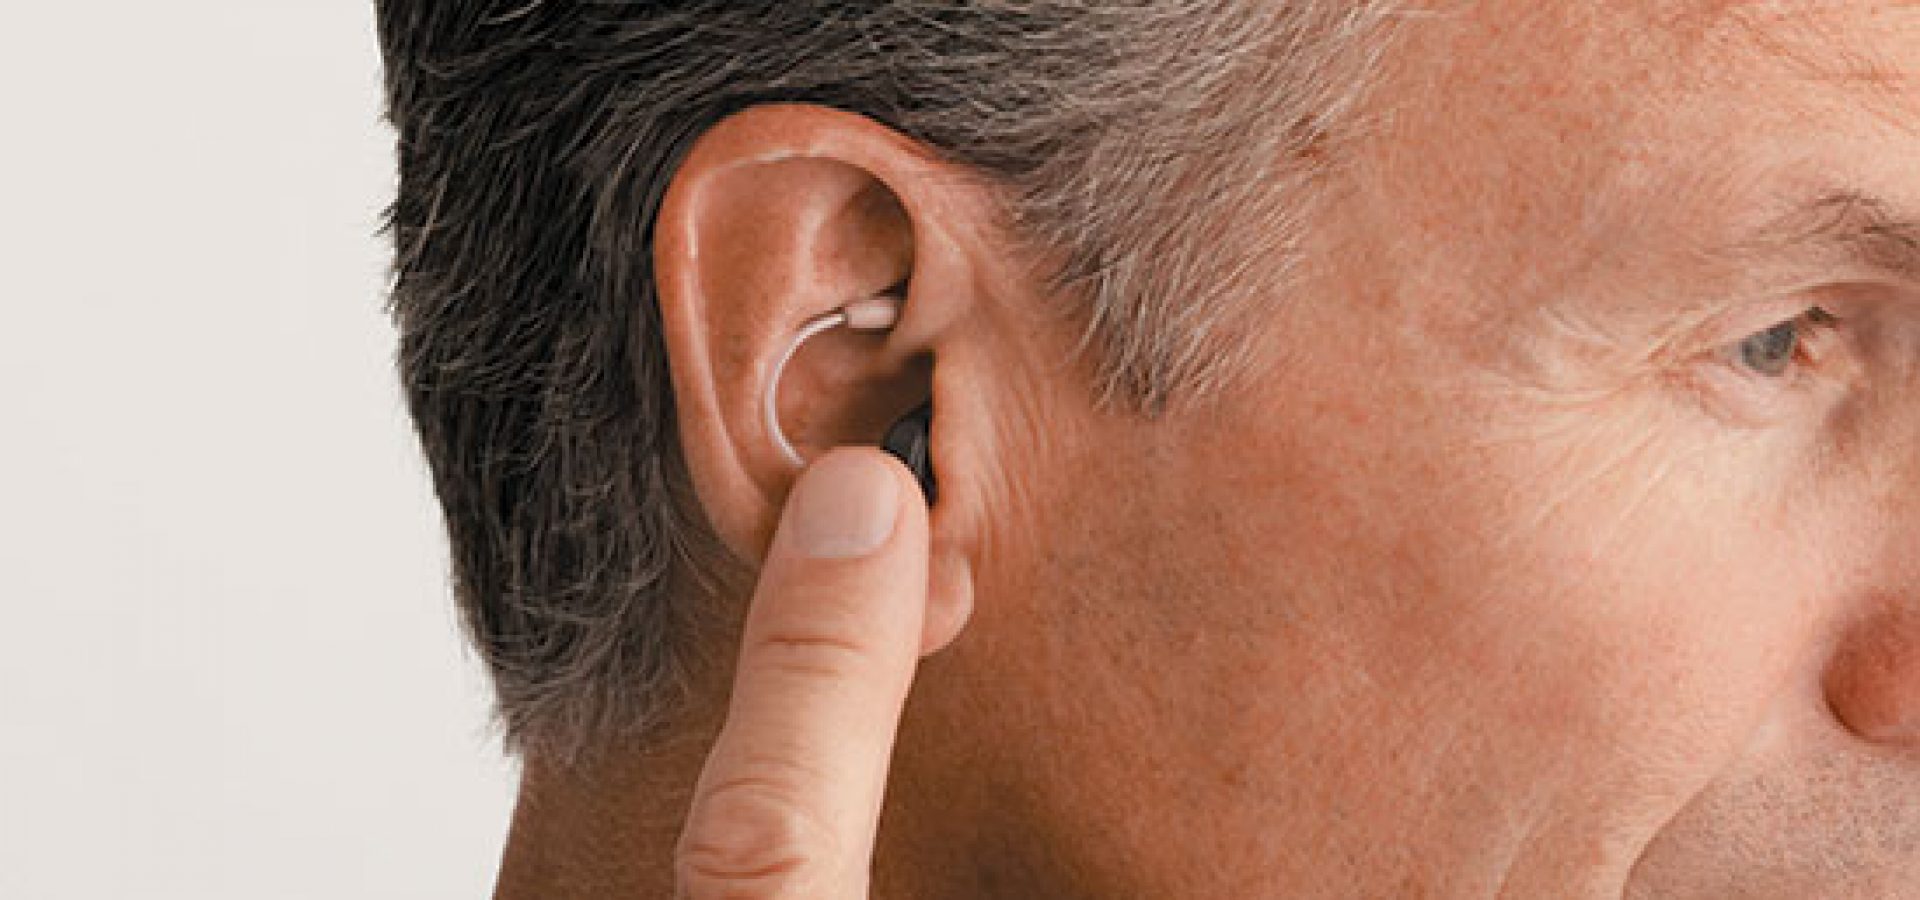 Hearing aid and middle-aged man